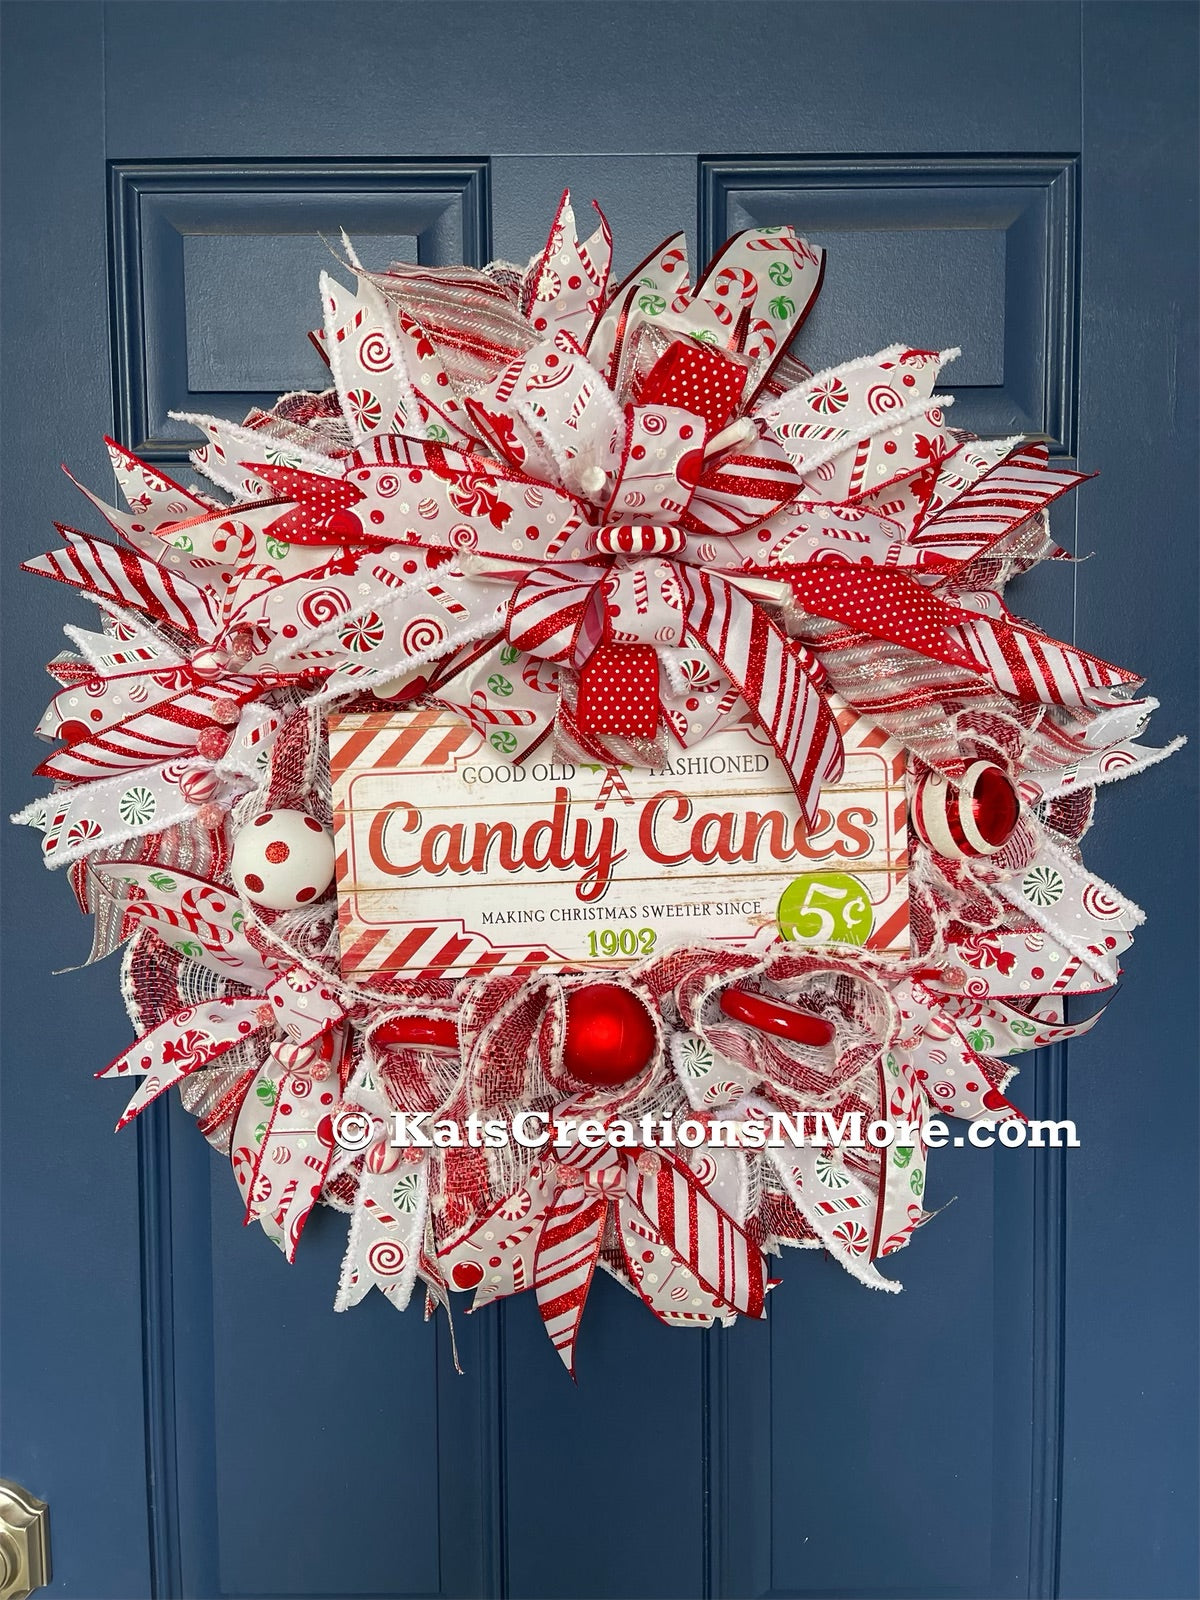 candy cane Christmas wreath with red, white, and accents of green